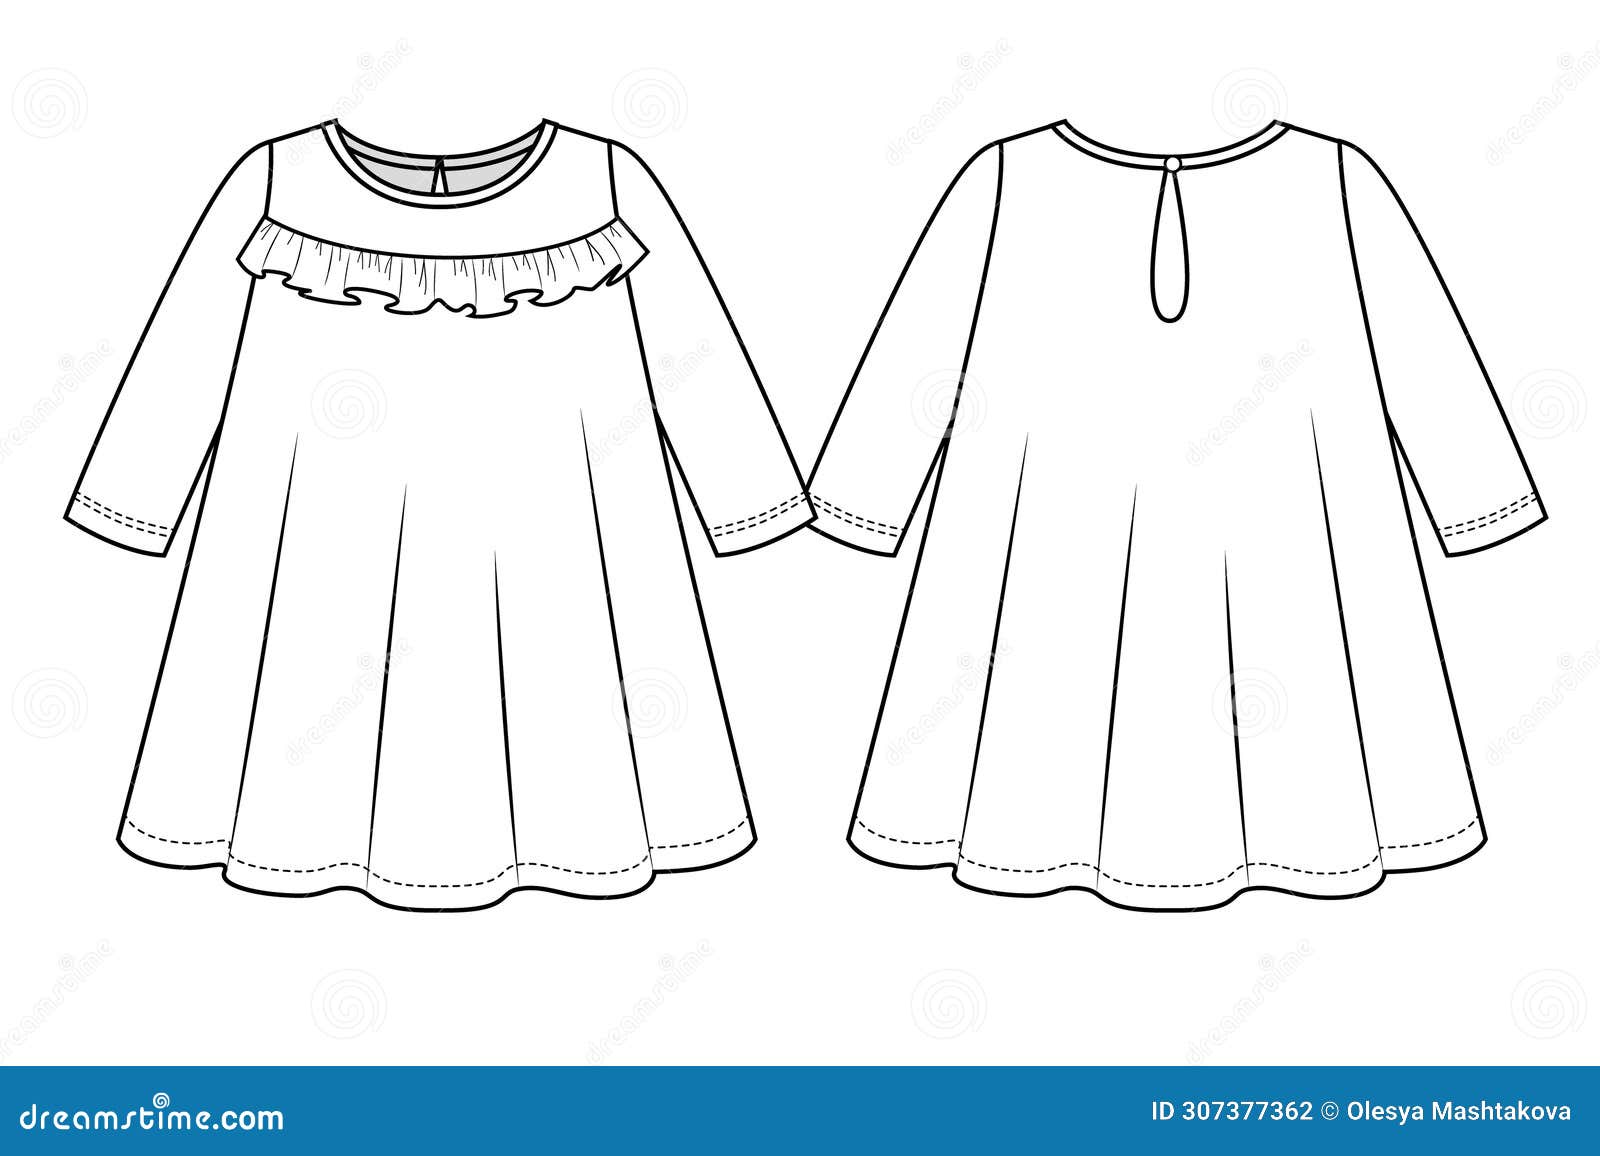 Long Sleeve T Shirt Top With Skirt Kids Dress Design Technical Flat Sketch  Vector Template. Apparel Fashion Illustration Front And Back View. Easy  Editable And Customizable. Royalty Free SVG, Cliparts, Vectors, and